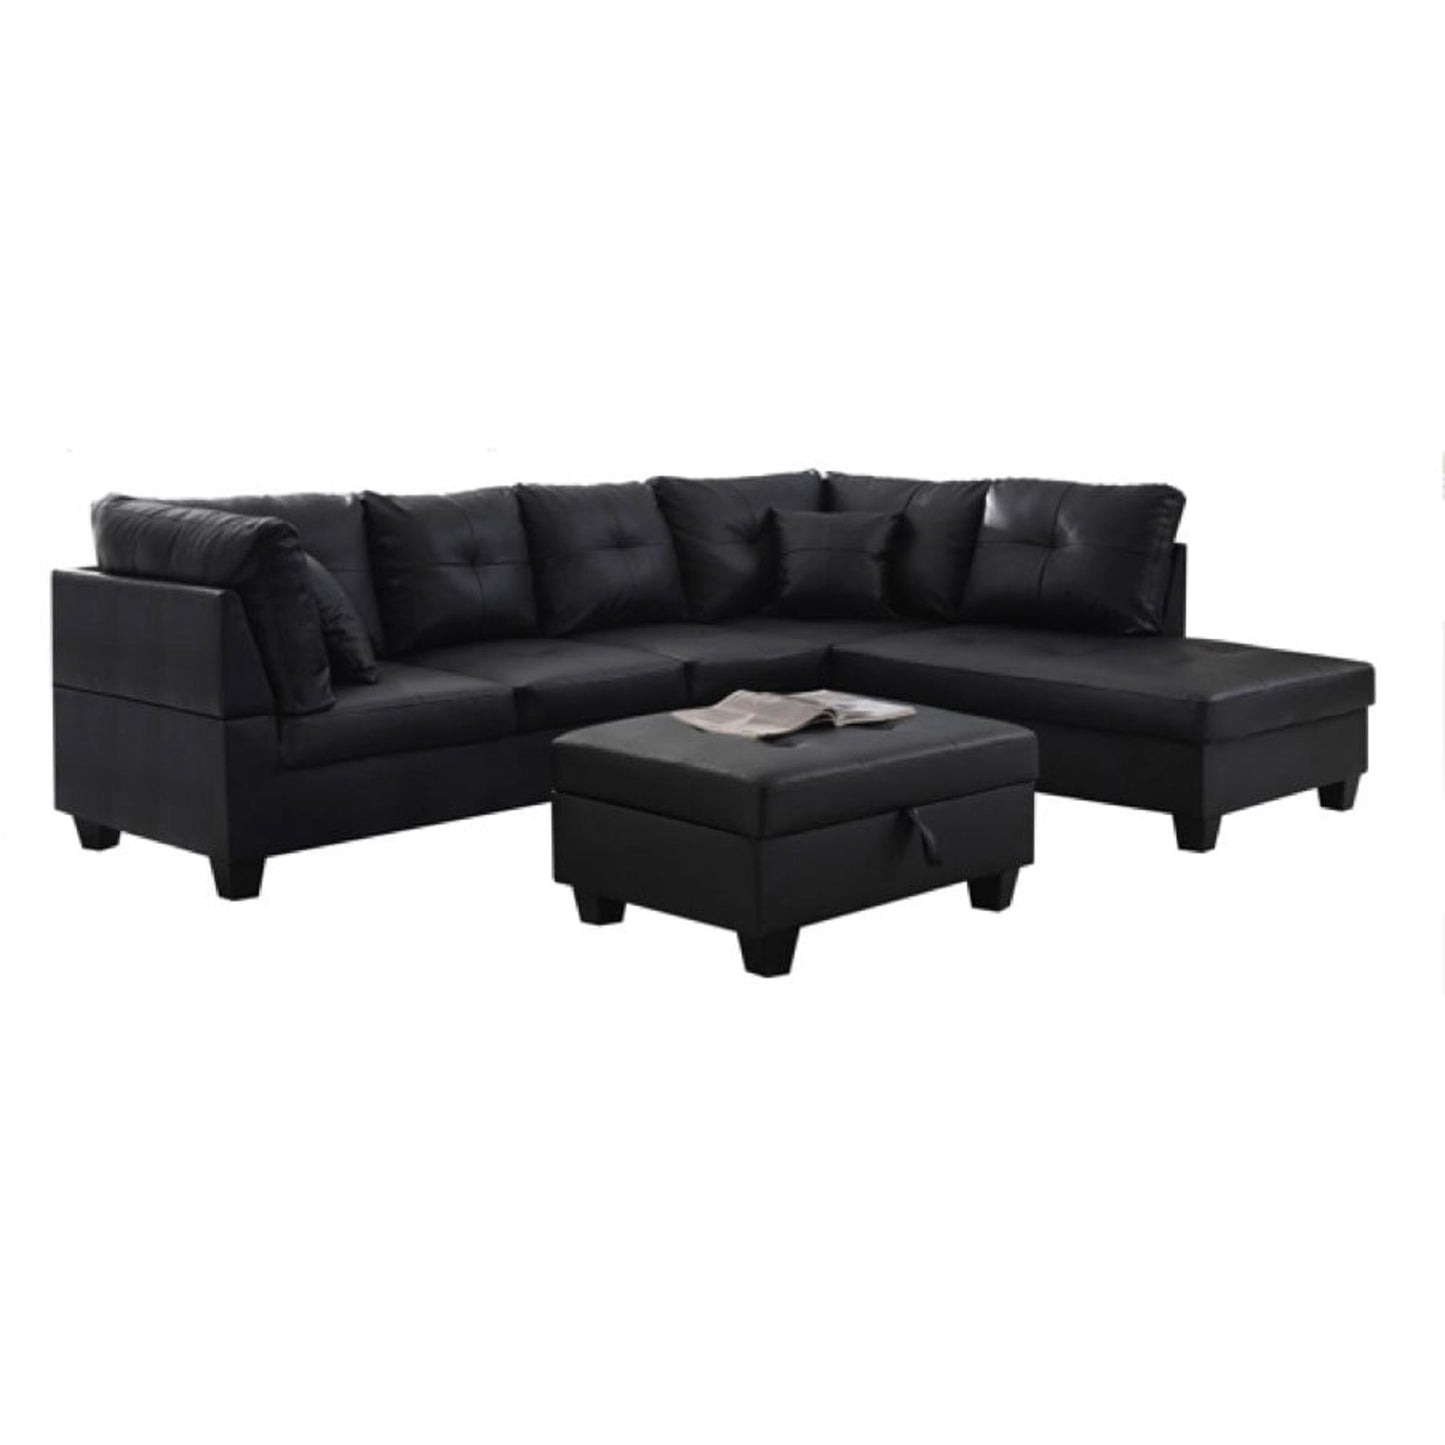 Spencer Sectional with Storage Ottoman in Black PU